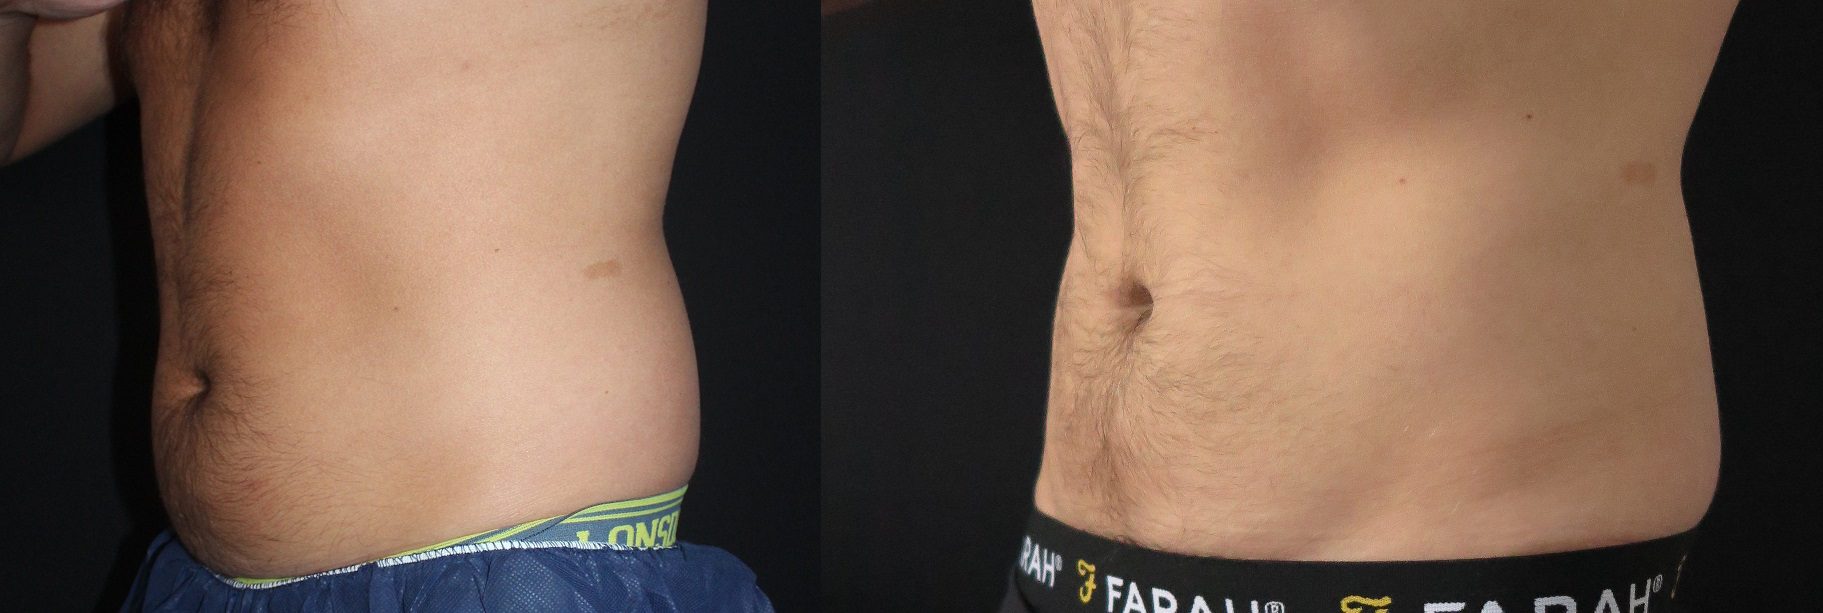 Coolsculpting side Abdomen before and after